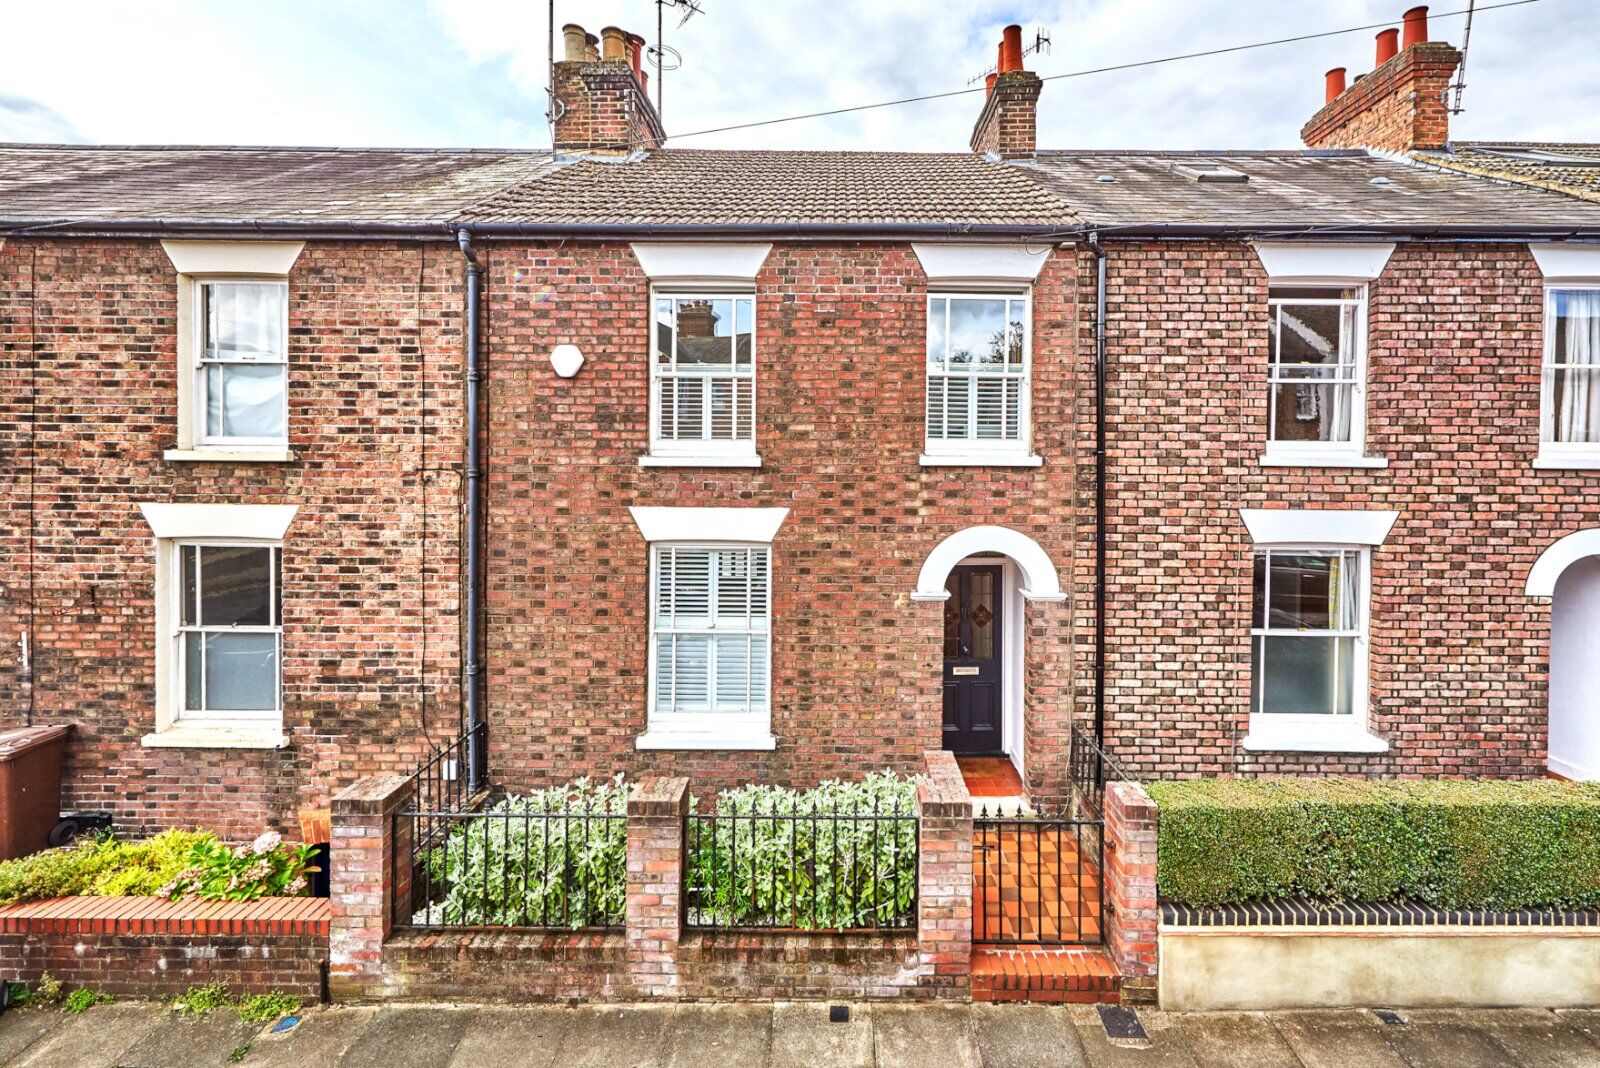 4 bedroom mid terraced house for sale West View Road, St. Albans, AL3, main image